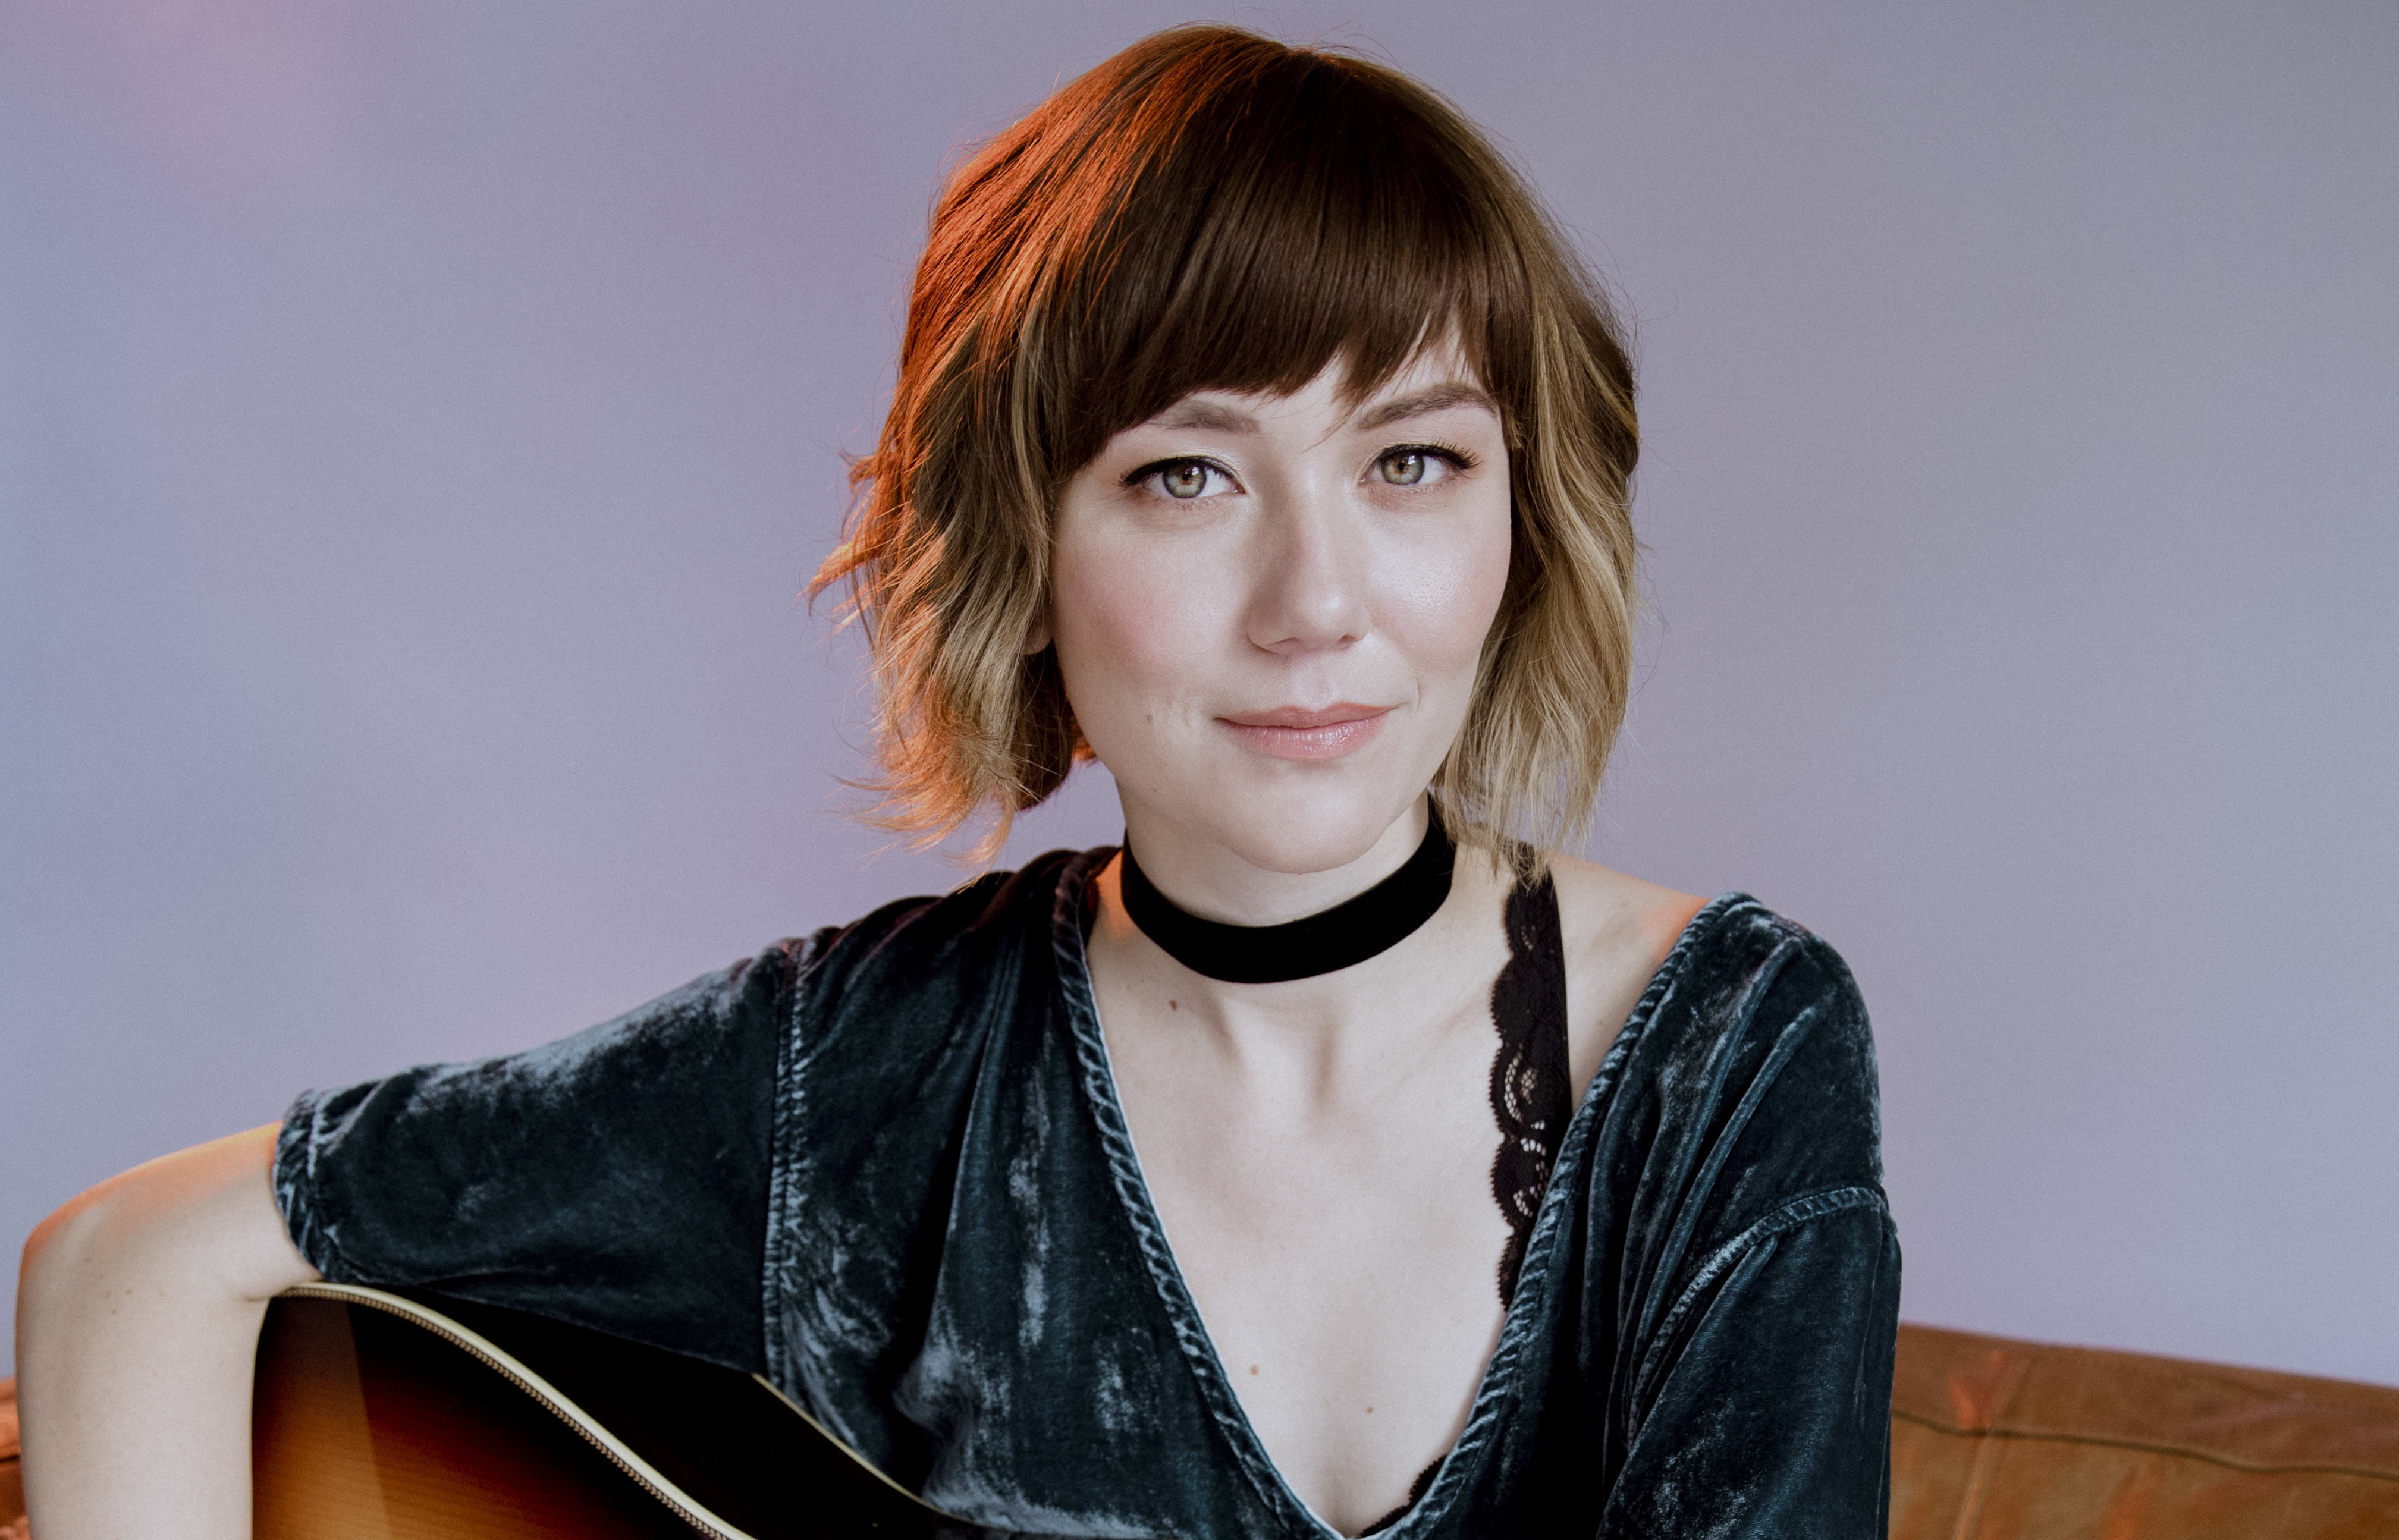 Award winning guitarist and songwriter Molly Tuttle